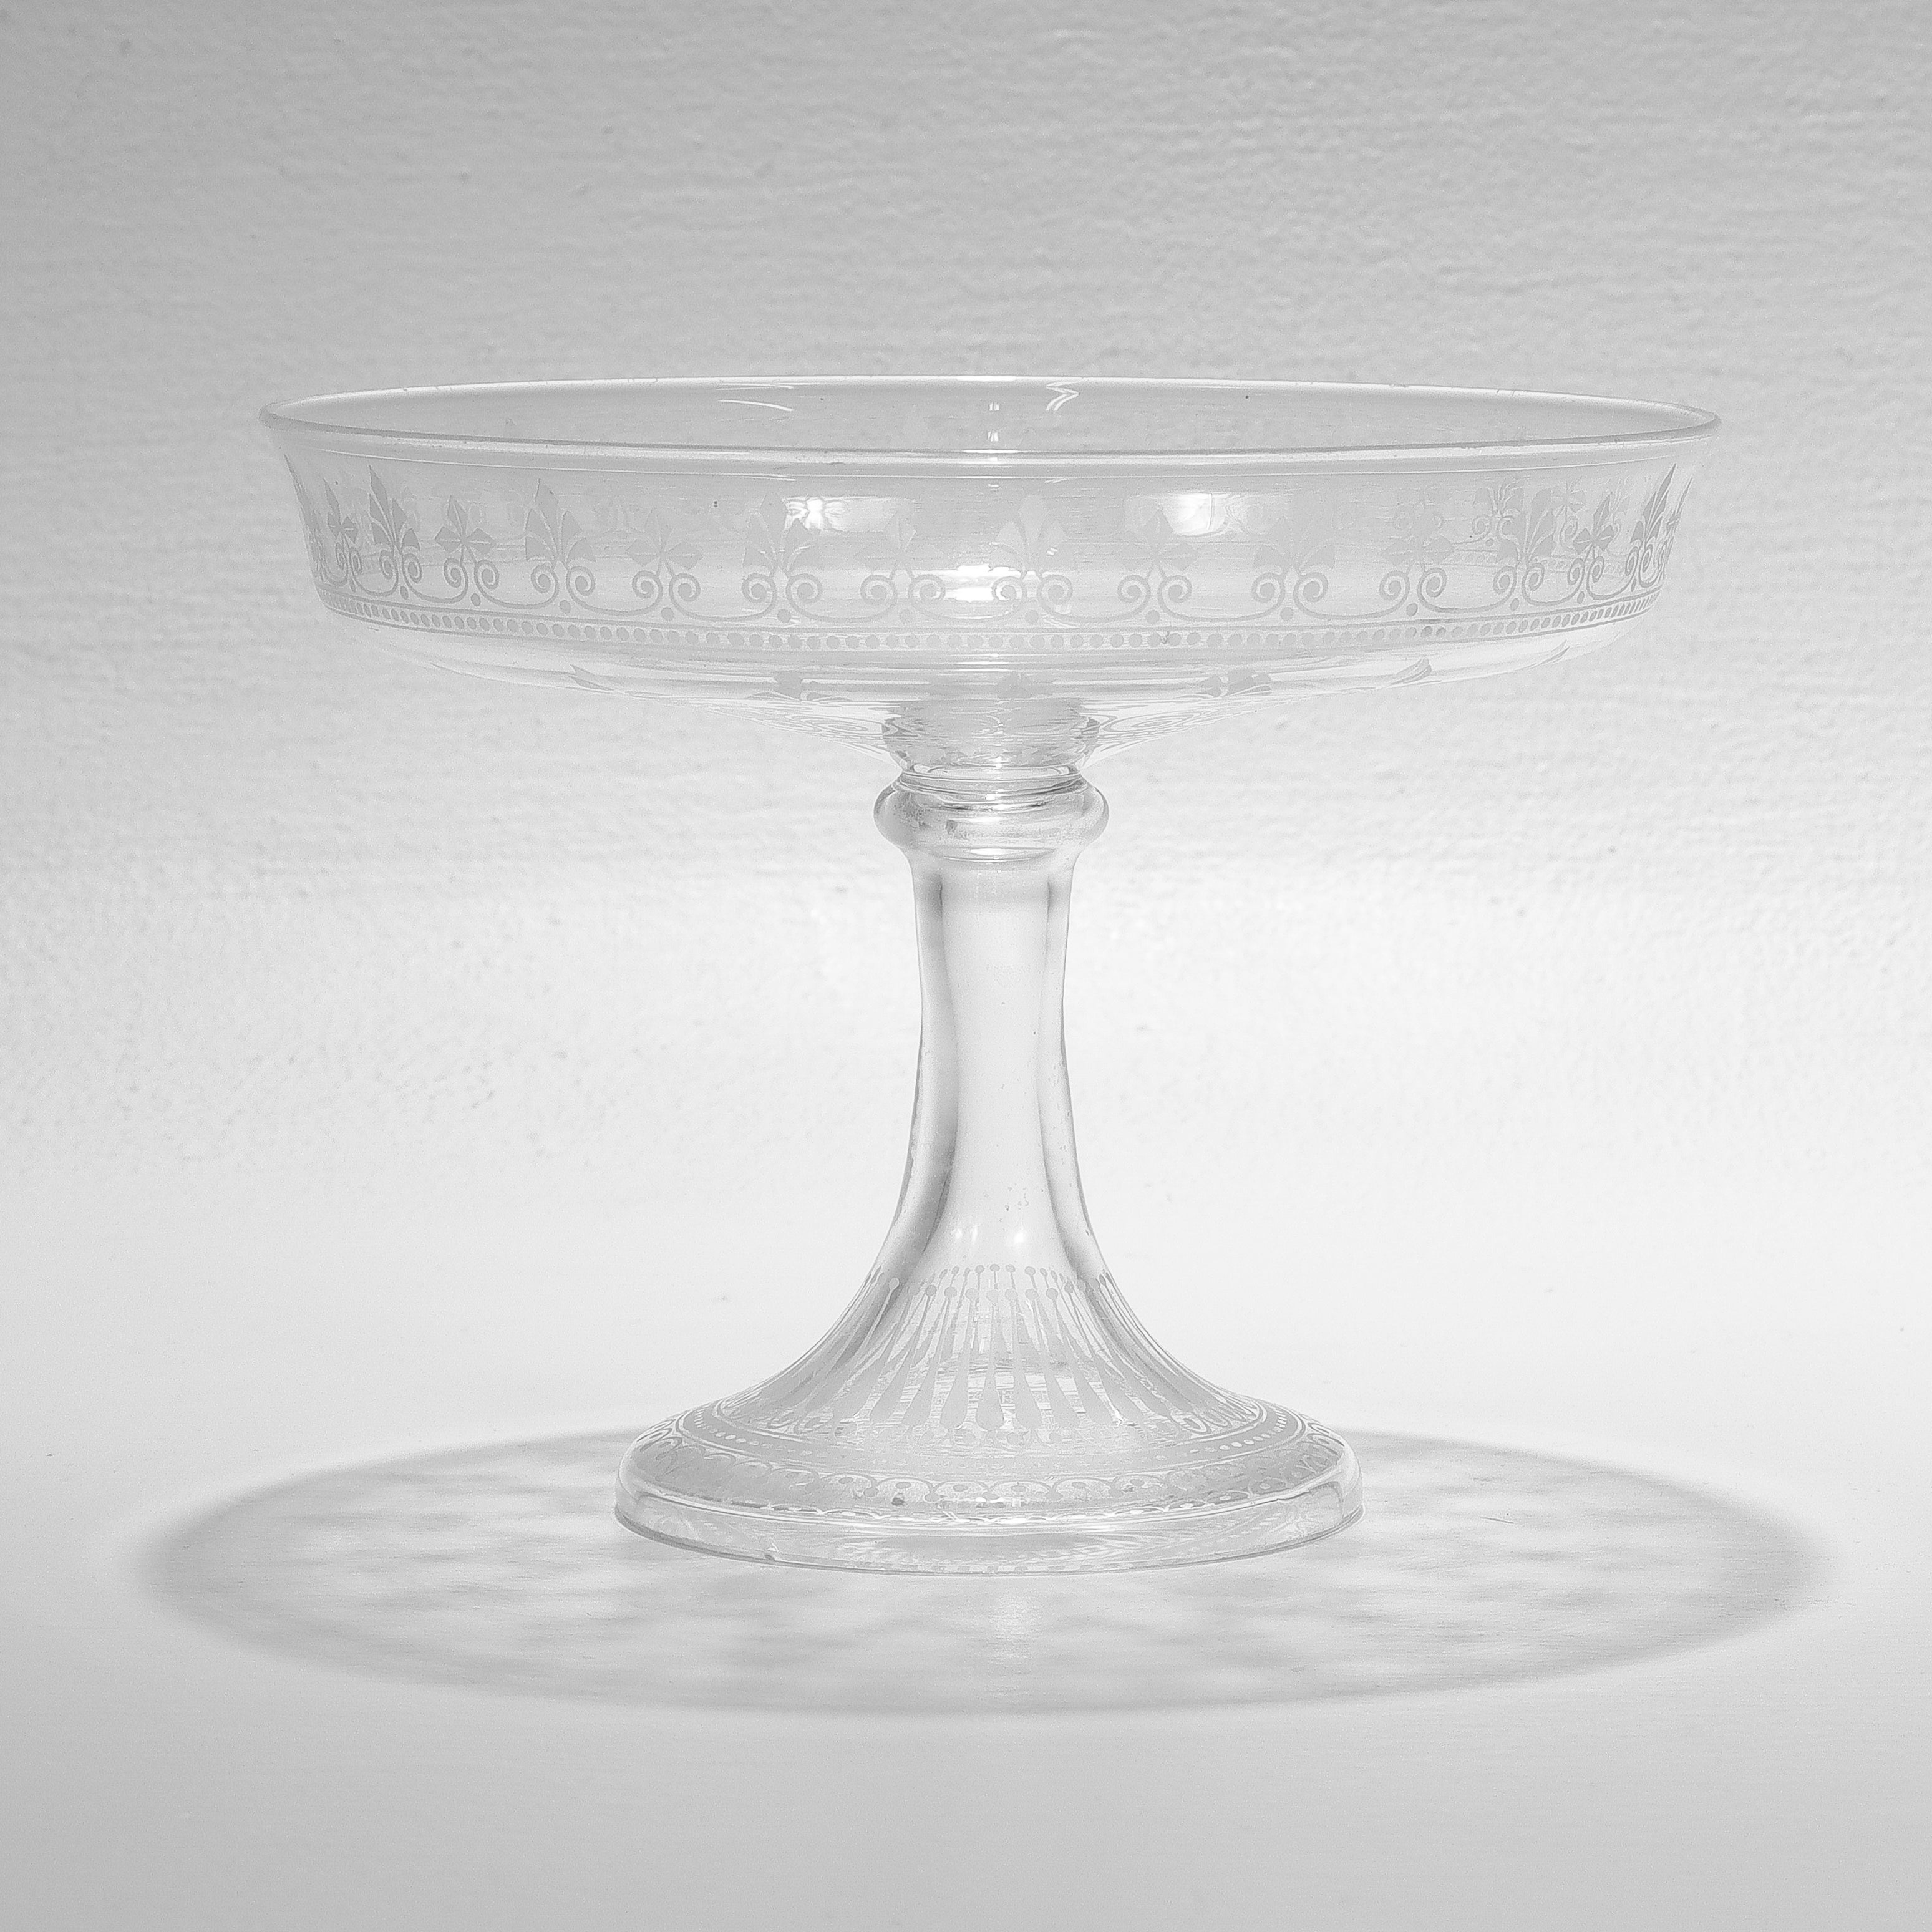 A fine antique etched and engraved glass tazza or compote.

Attributed to Stevens & Williams or Webb.

With engraved & etched geometric designs and leafy devices.

Simply a wonderful English glass compote!

Date:
Late 19th or Early 20th